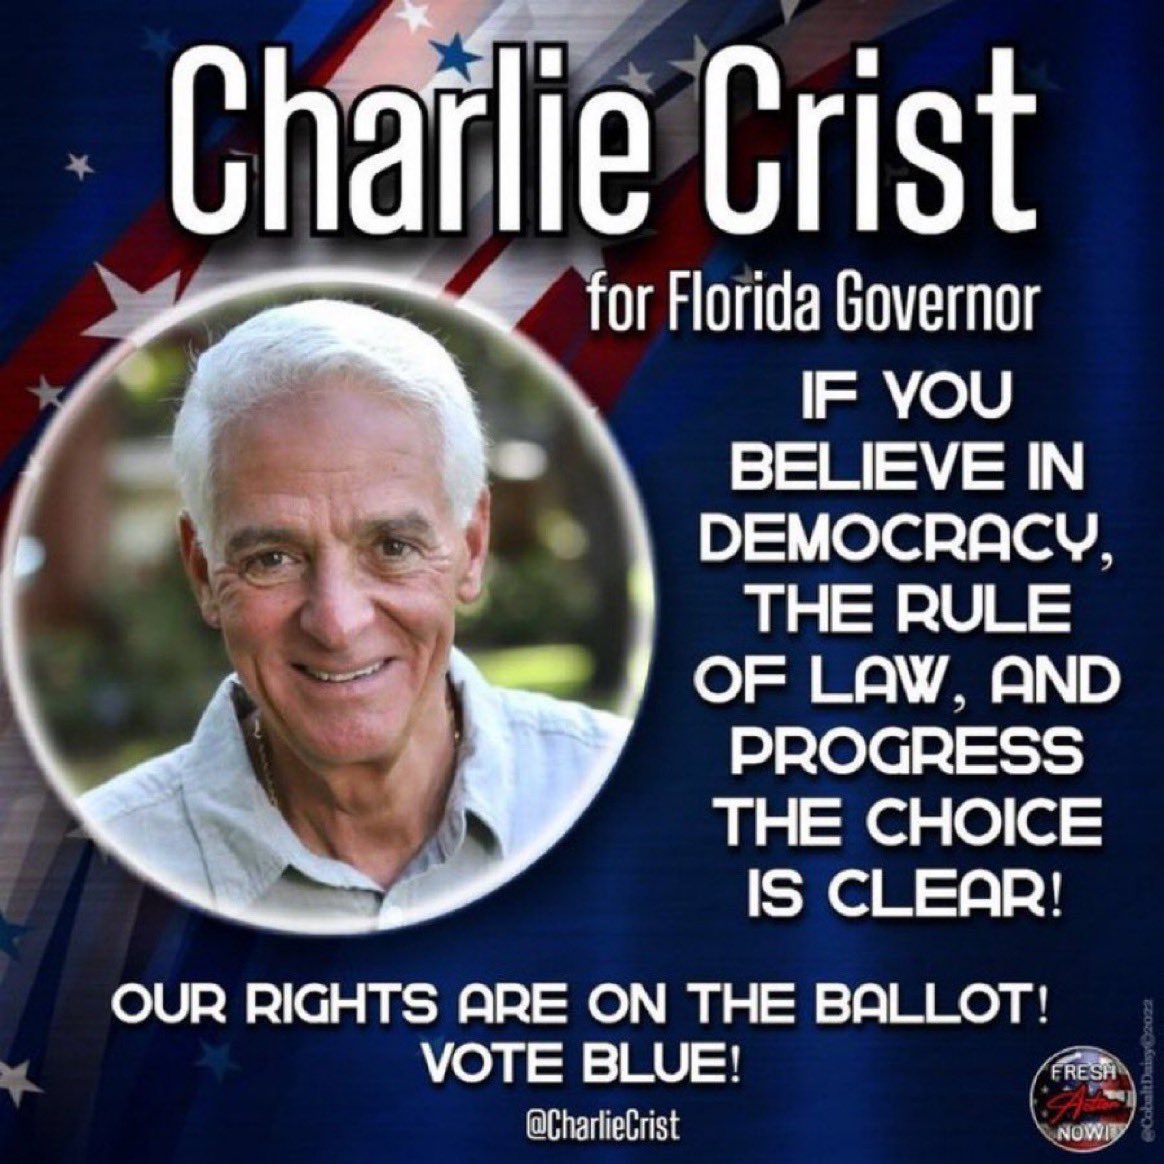 “Ron DeSantis won't protect your right to an abortion, lower your home insurance premiums, or take on the utilities to lower your rates. I will.”—@CharlieCrist Now, if you want someone to attack voters, kids, Disney & the media, DeSantis is your guy. #FreshResists #wtpBLUE